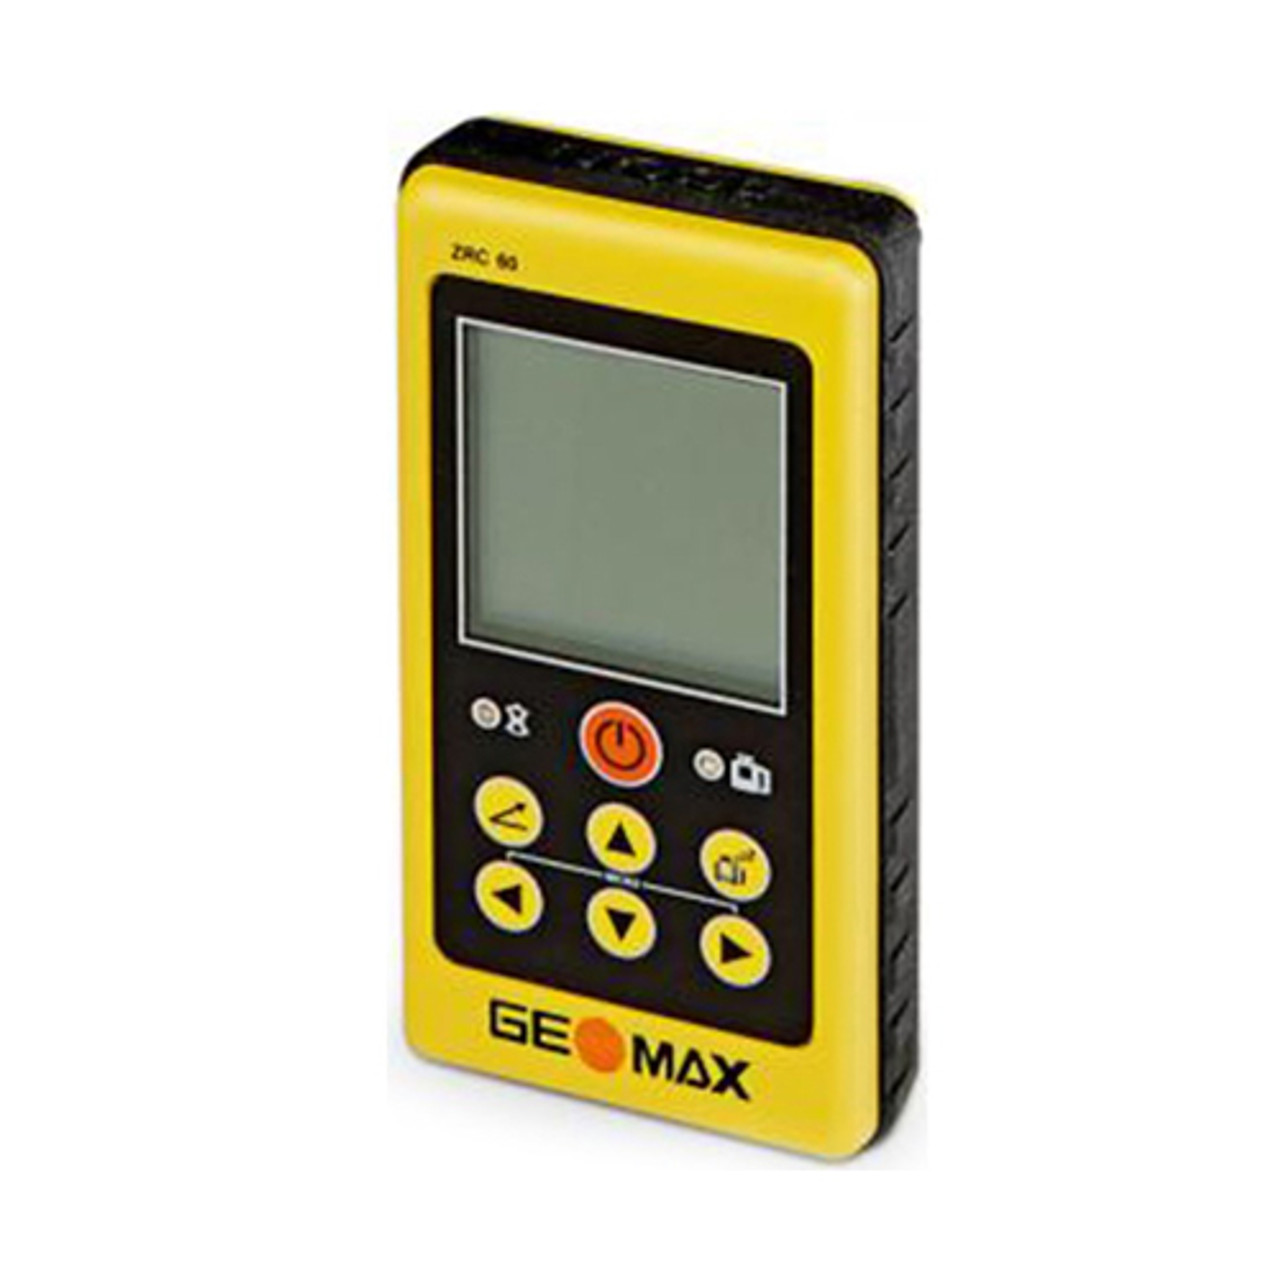 Geomax Zone 60DG up to 15% Dual Grade Laser Level, ZRB90 receiver w/Certificate of Calibration. (6013528)